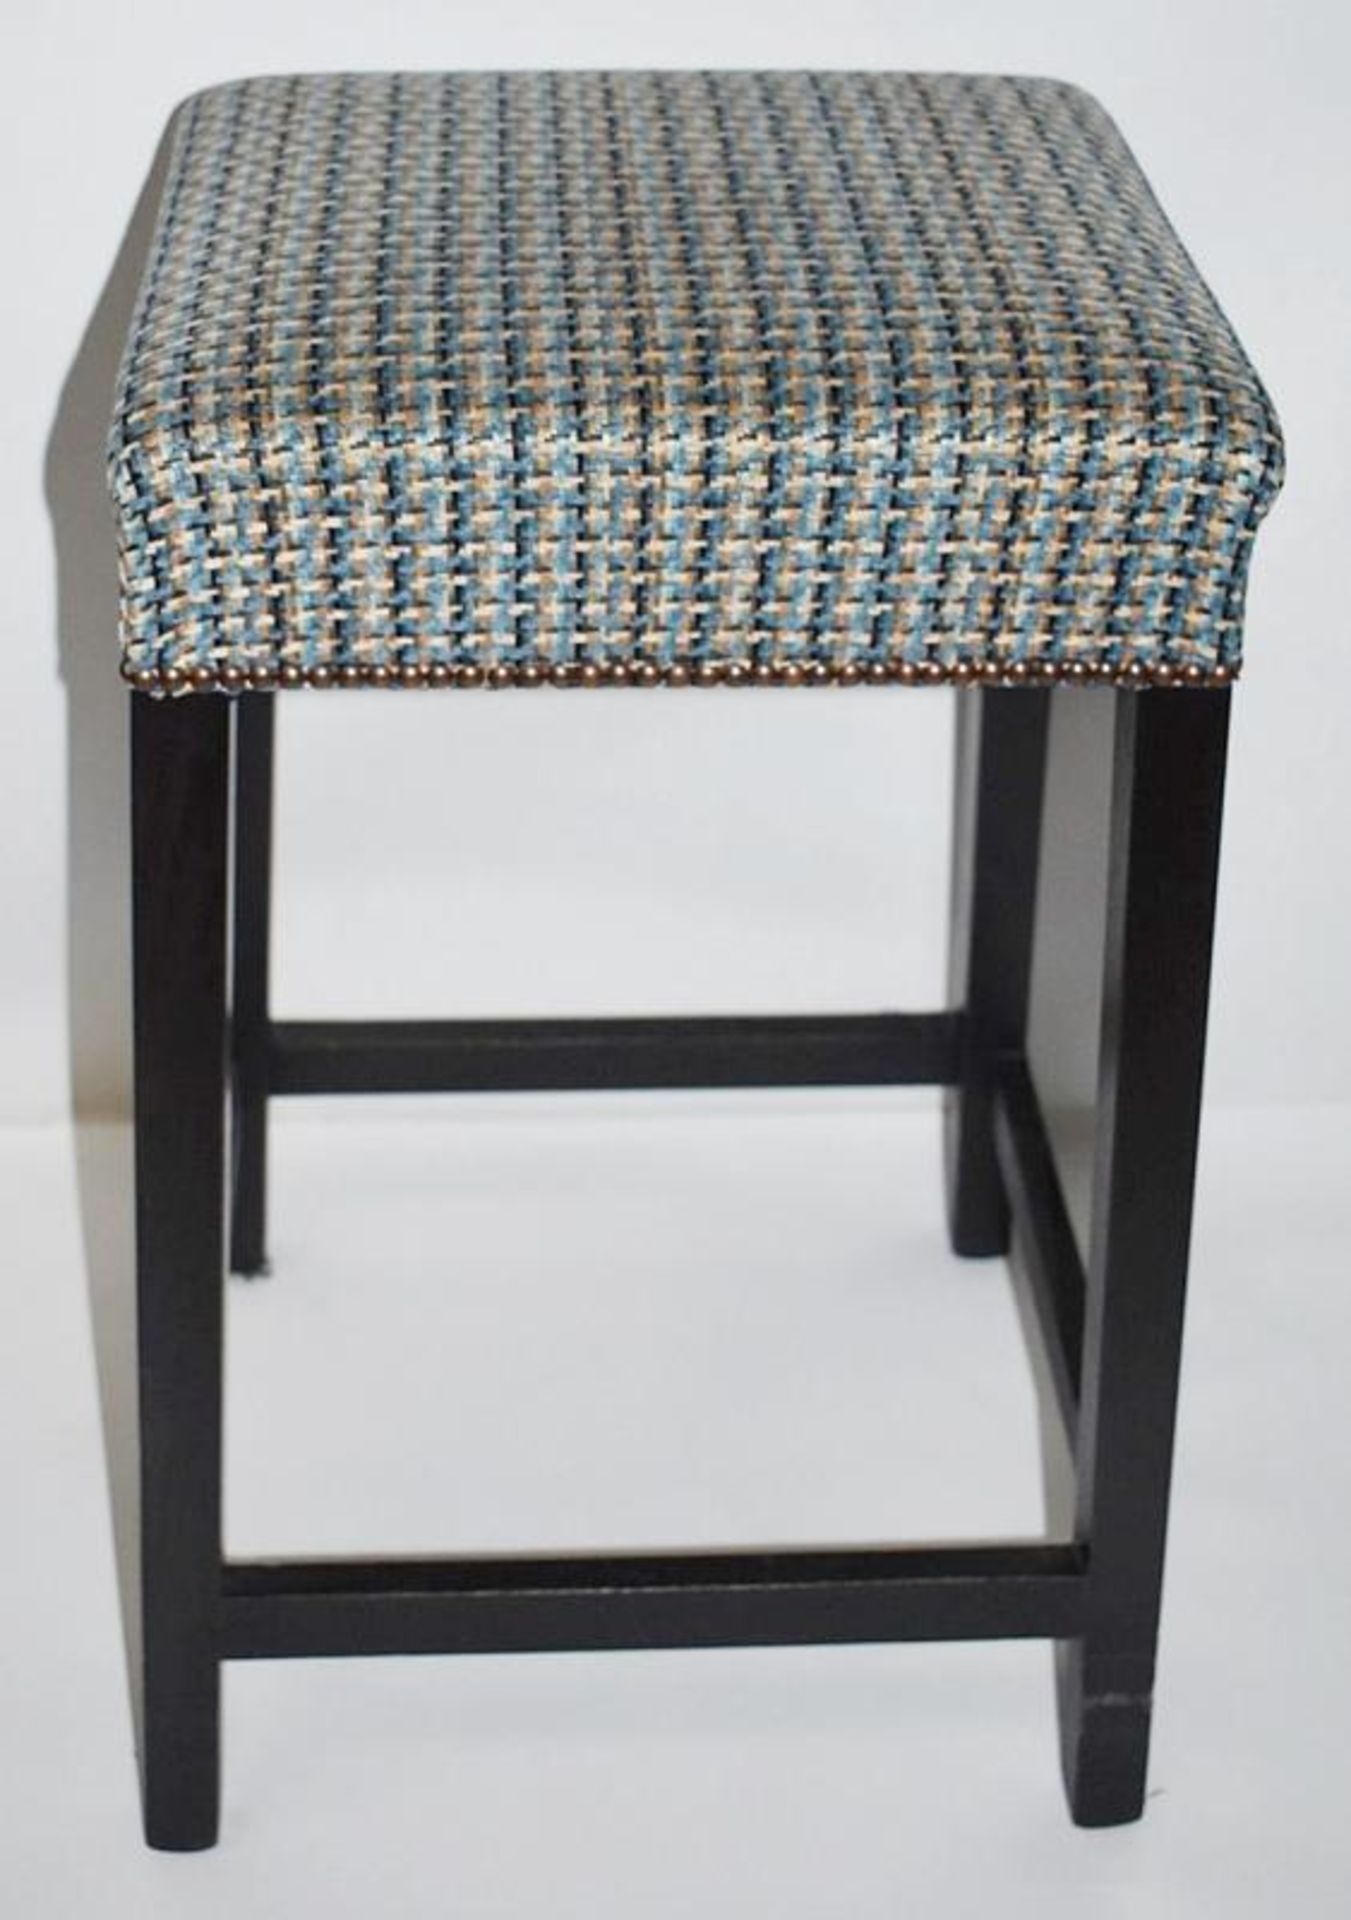 1 x Contemporary Bar Stool Upholstered In A Chic Designer Fabric - Recently Removed From A Famous De - Image 3 of 7